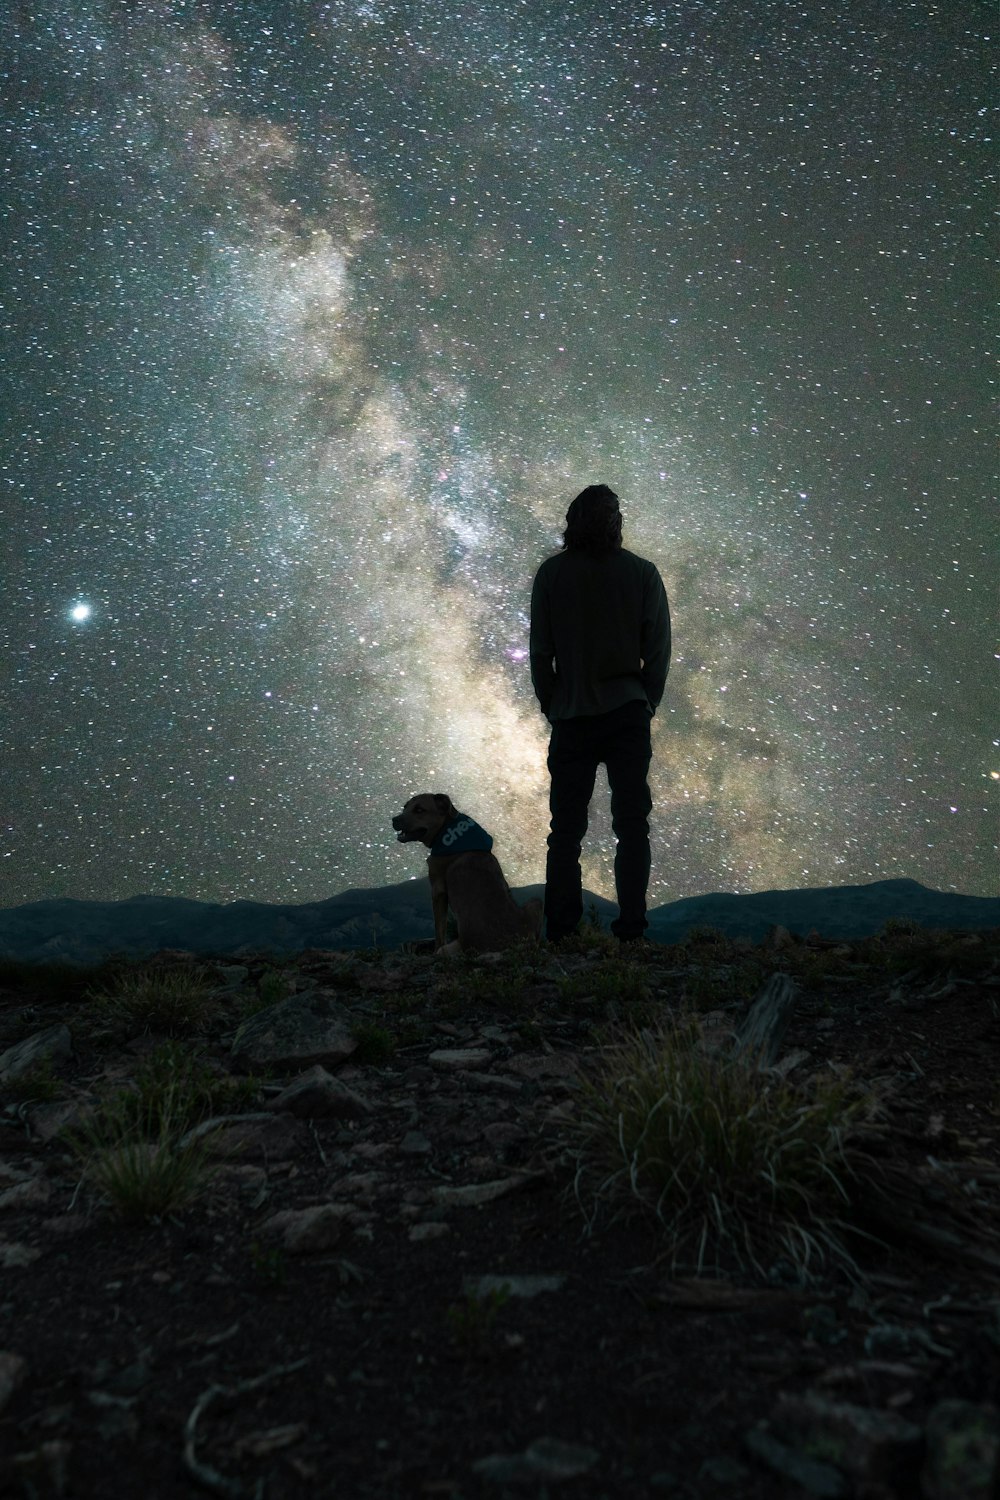 silhouette of man and dog standing on rock during night time